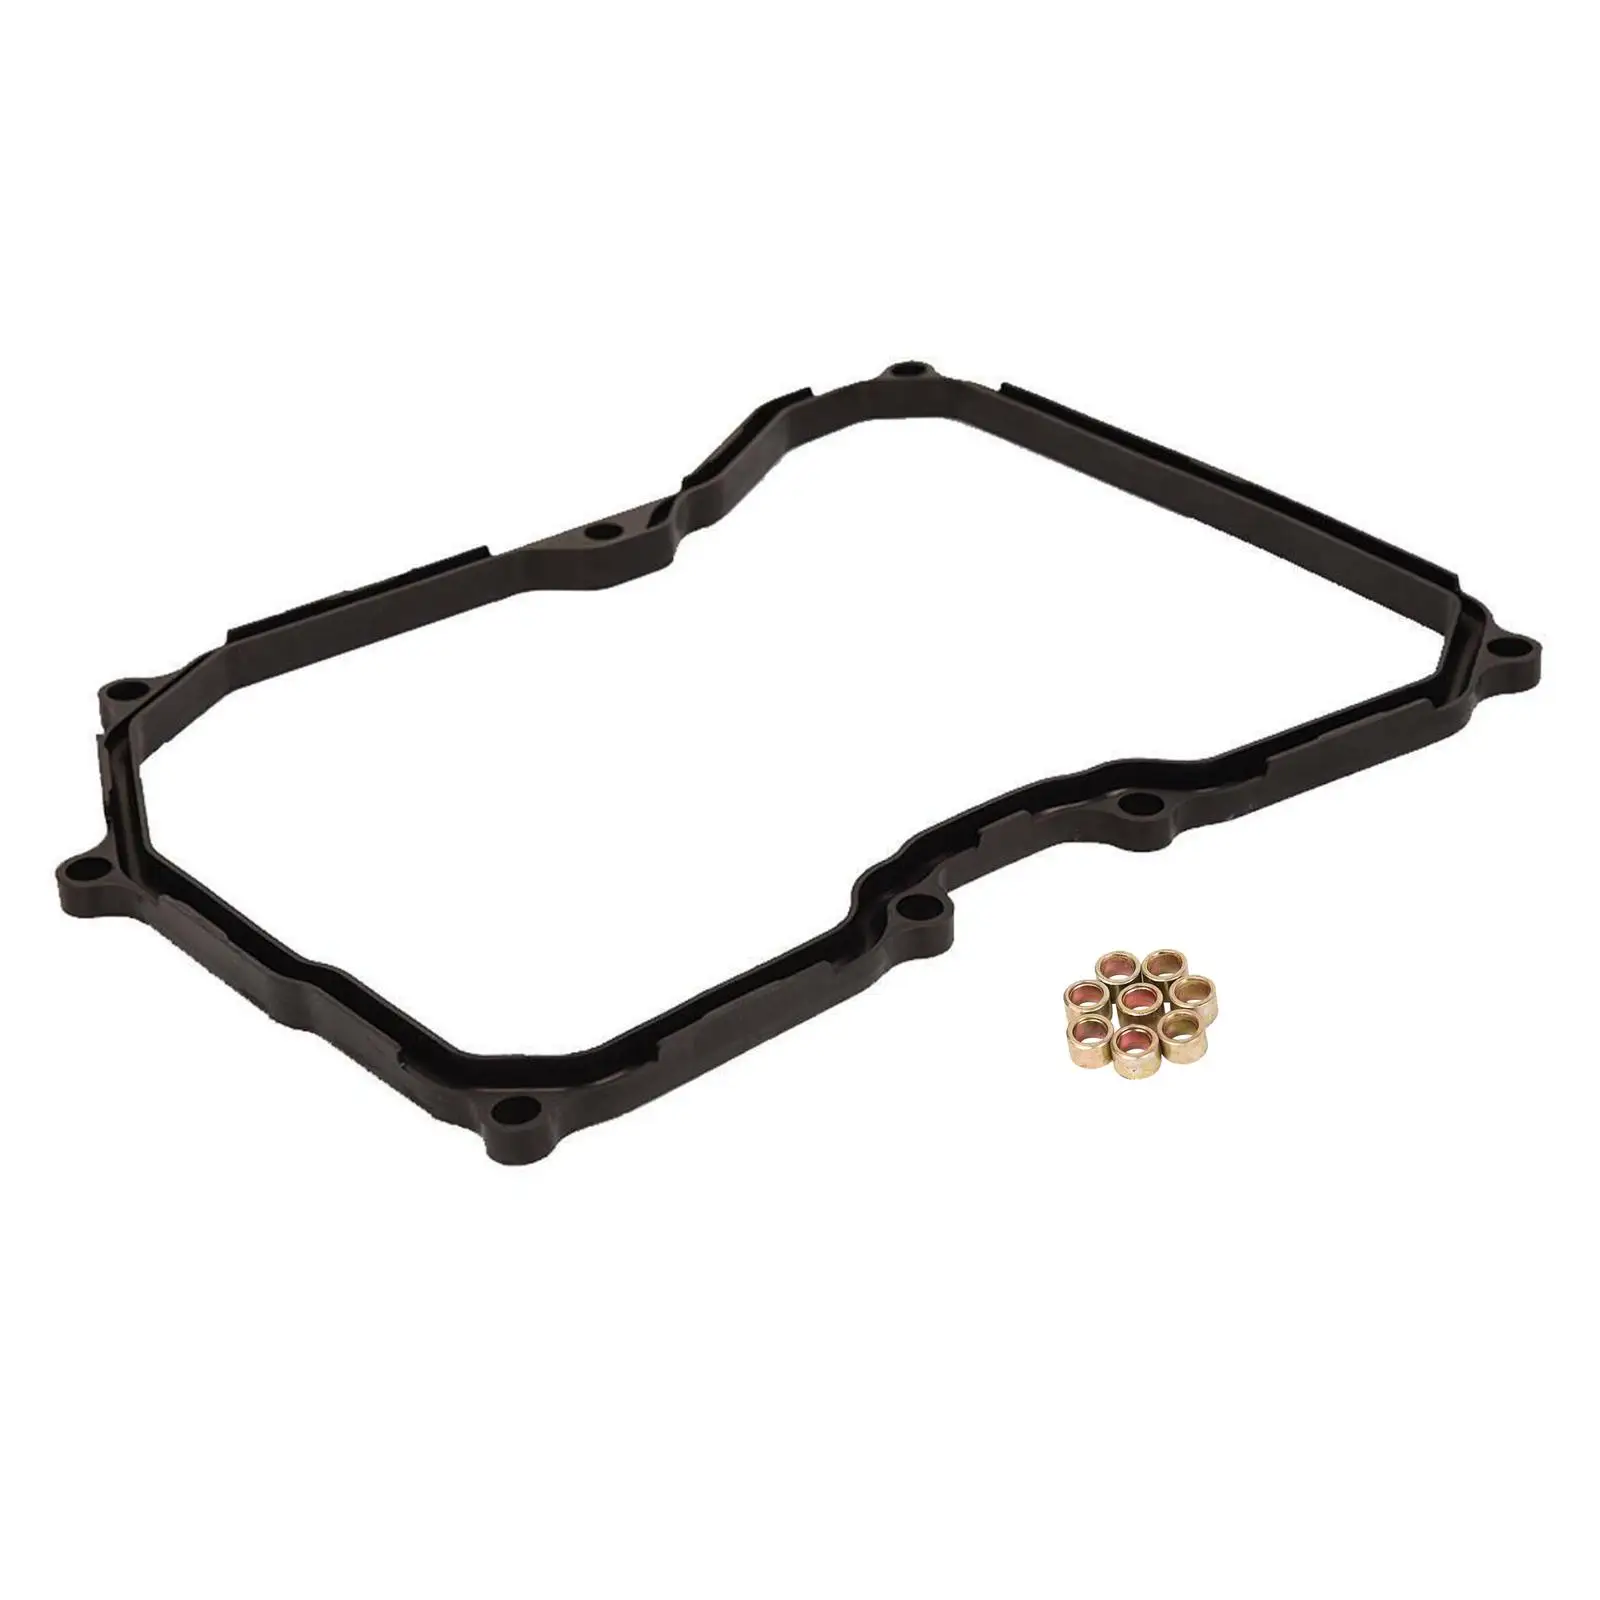 

Transmission Oil Pan Gasket Durable Lightweight 24117566356 Fit for Mini Replace Parts Accessories Easy to Install